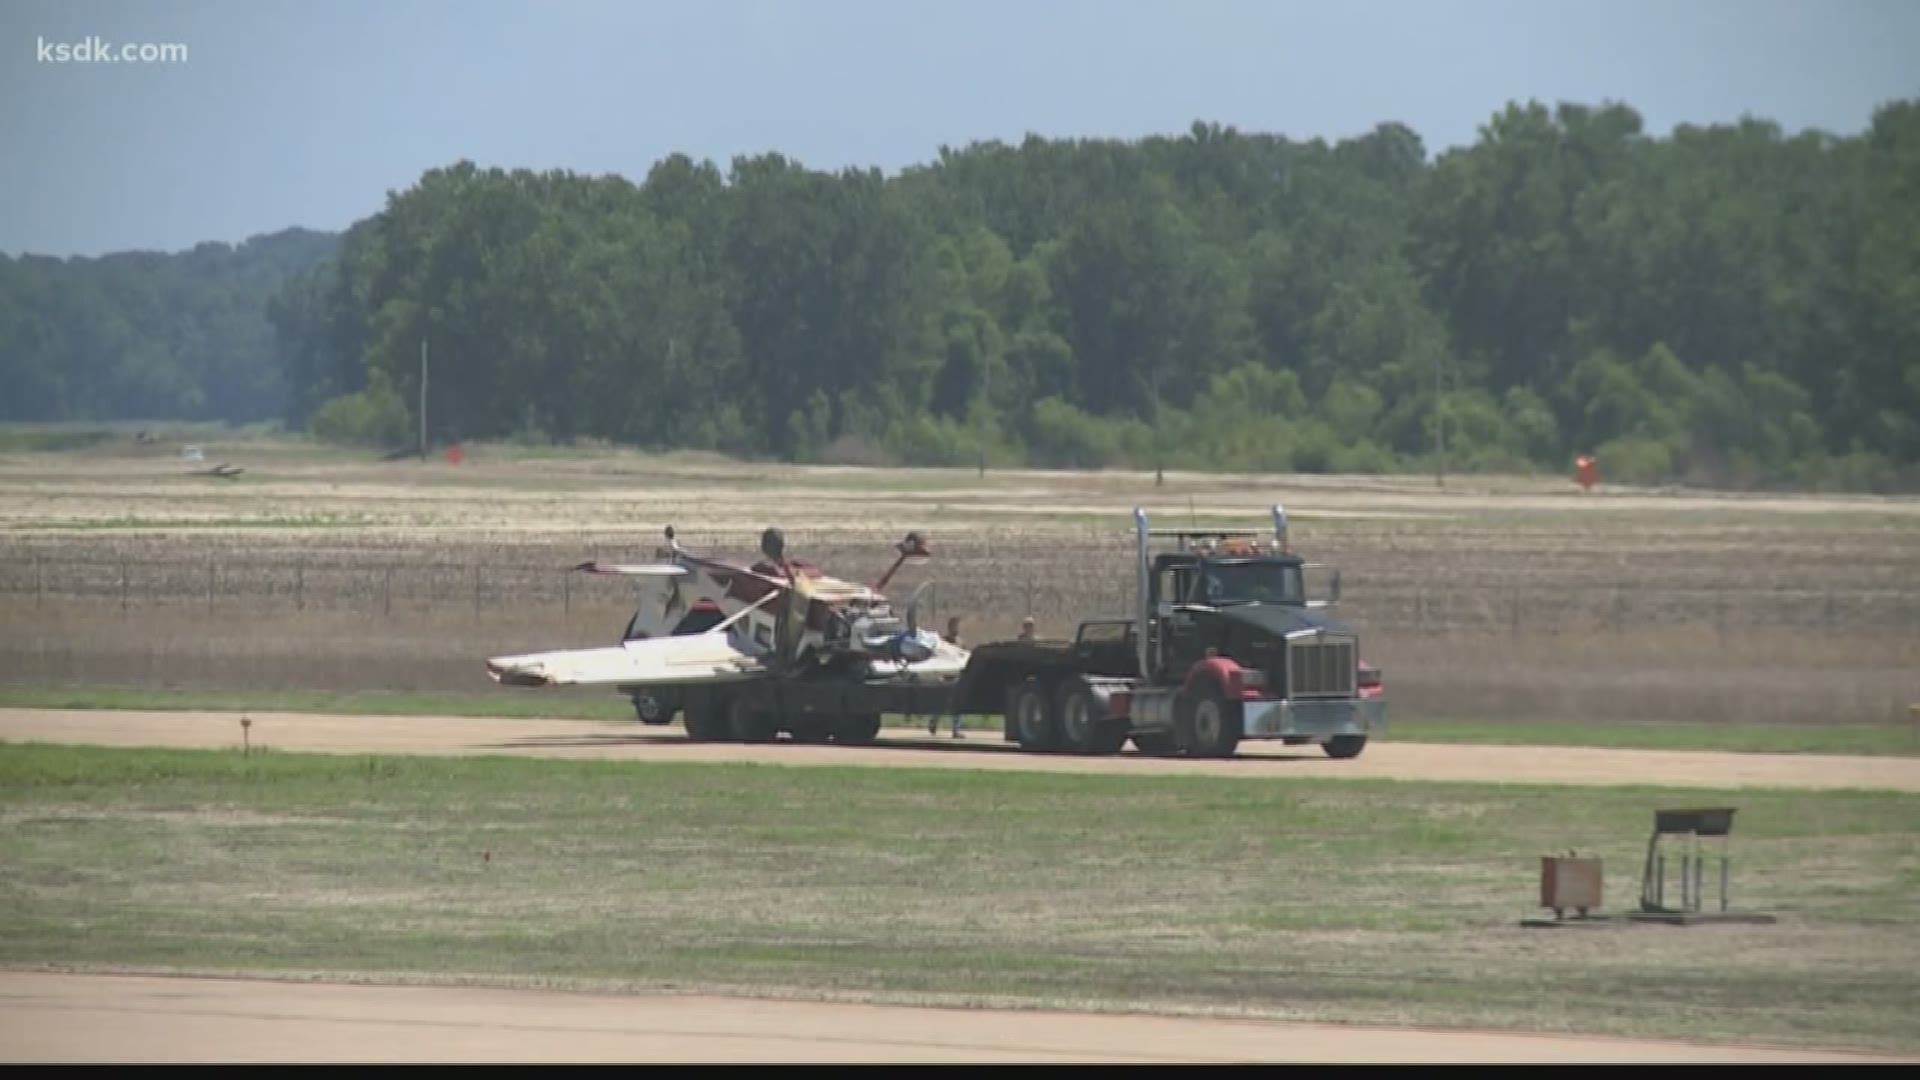 Upon arrival, firefighters found the single-engine airplane flipped onto its top about 10 feet off the runway.